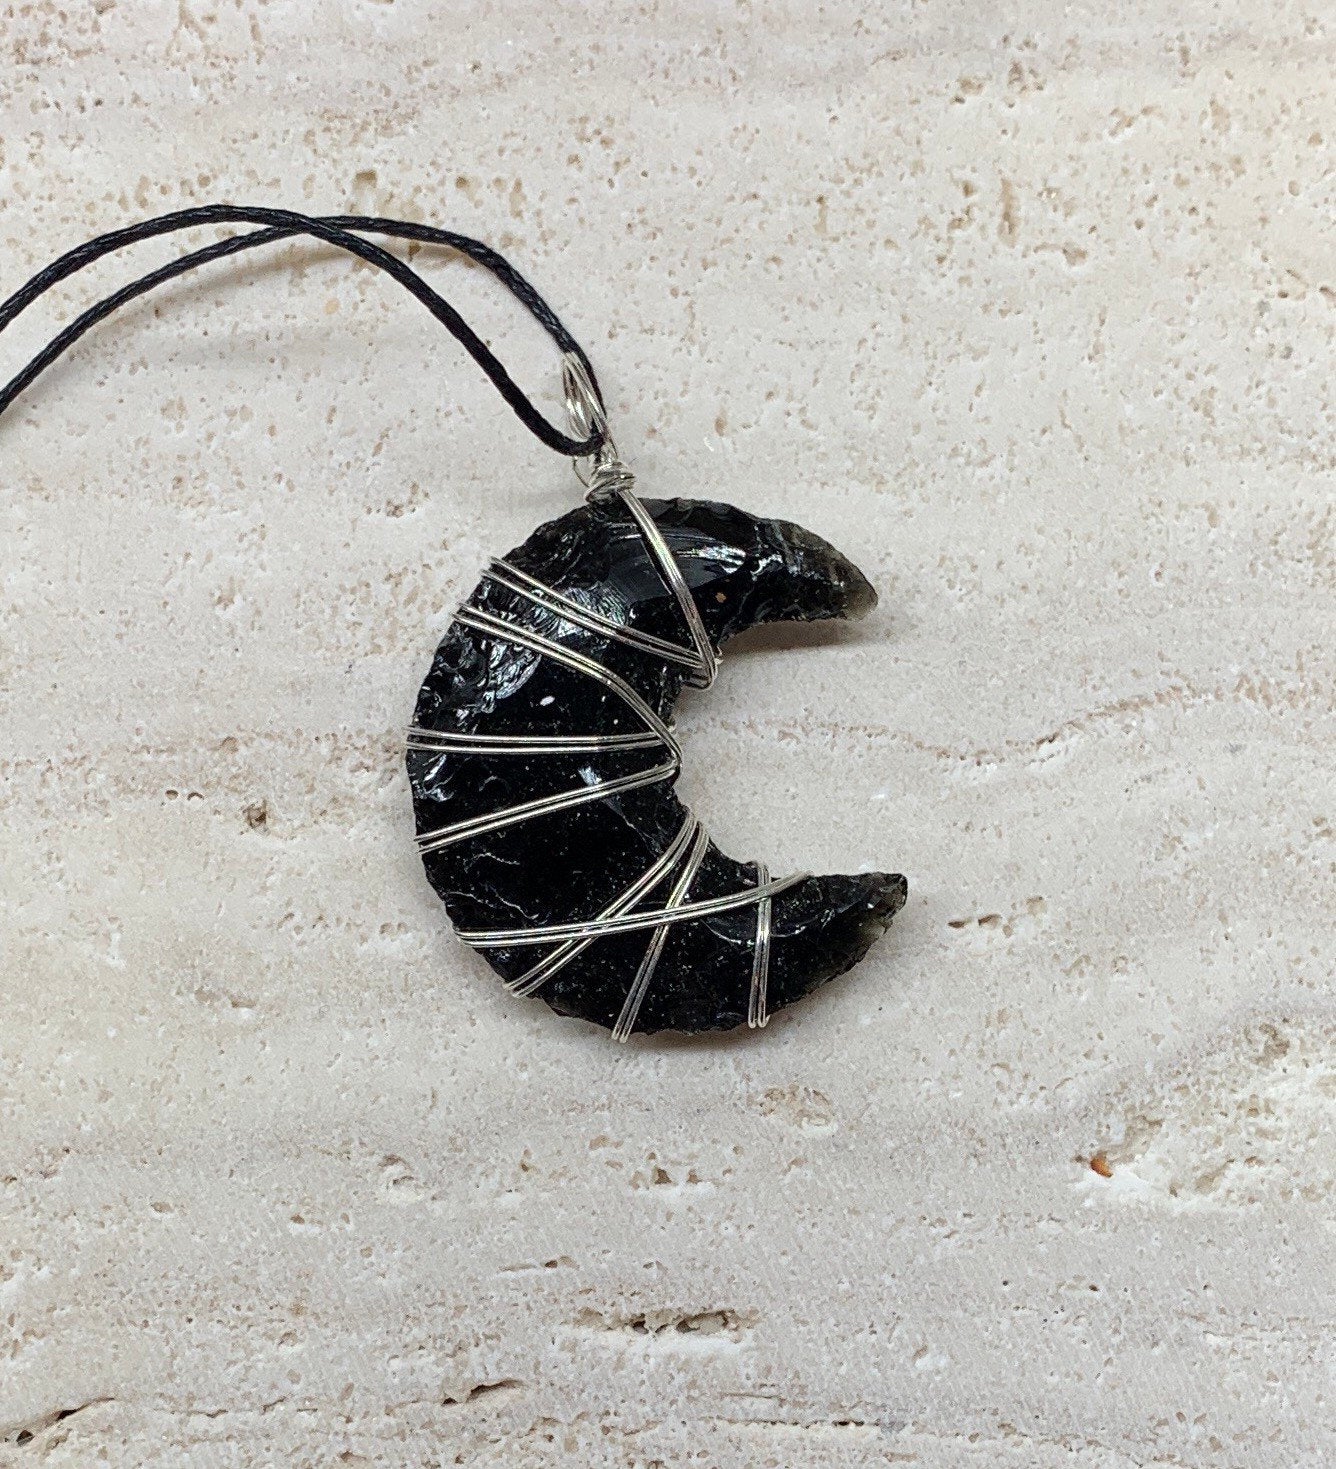 Silver wire wrapped obsidian crescent moon pendant with adjustable balck cord.